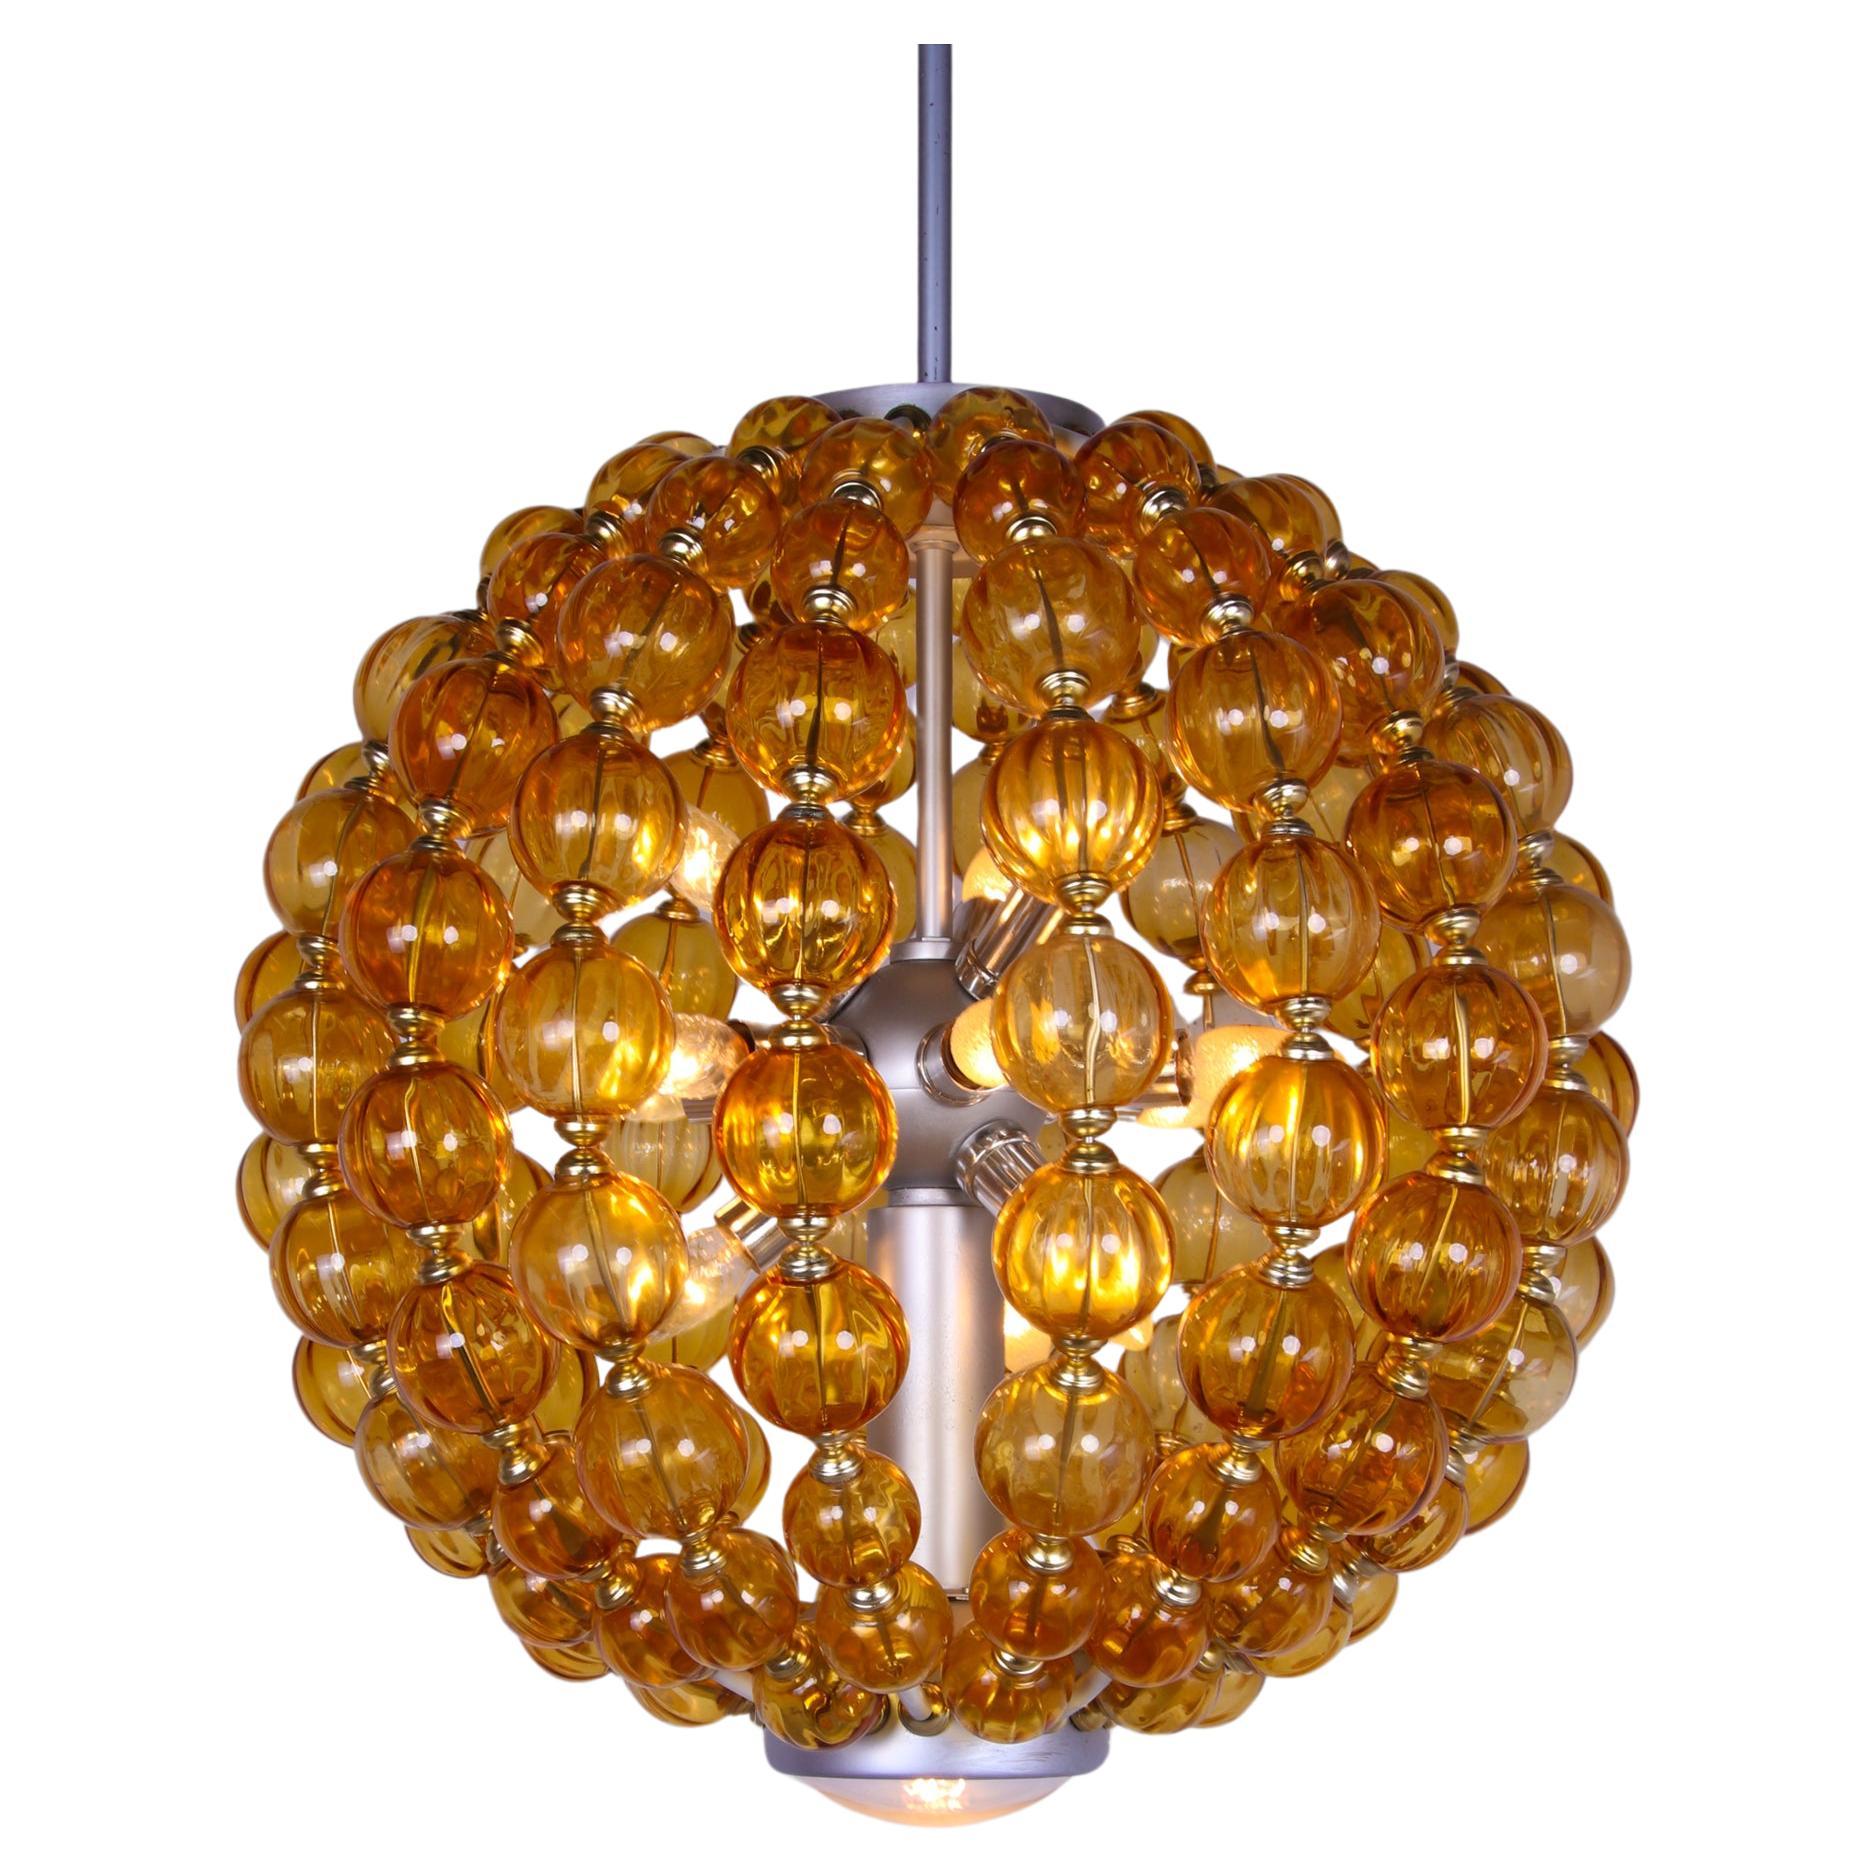 Spectacular huge 13 lights ballroom chandelier by VEB Leuchtenbau Leipzig, Germany with hand blown amber glass balls on a metal frame. 

This Impressive chandelier was made in Eastern Germany in the 1960s. 
It’s a highly distinctive piece and looks